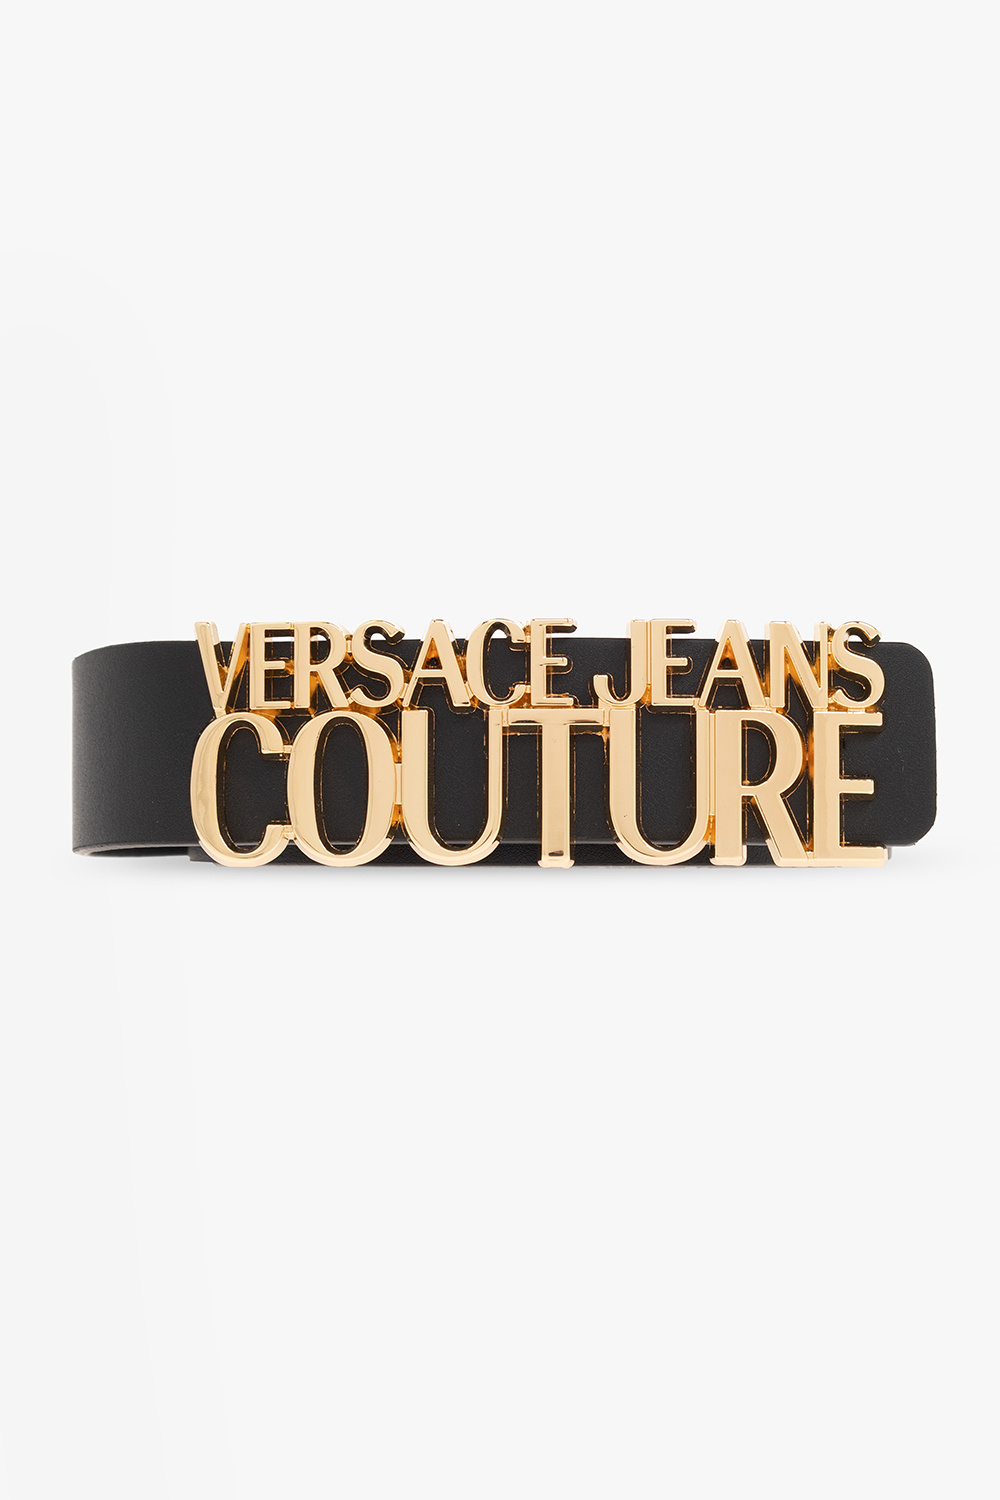 Versace Jeans Couture Logo Couture Legging in Gold & Black